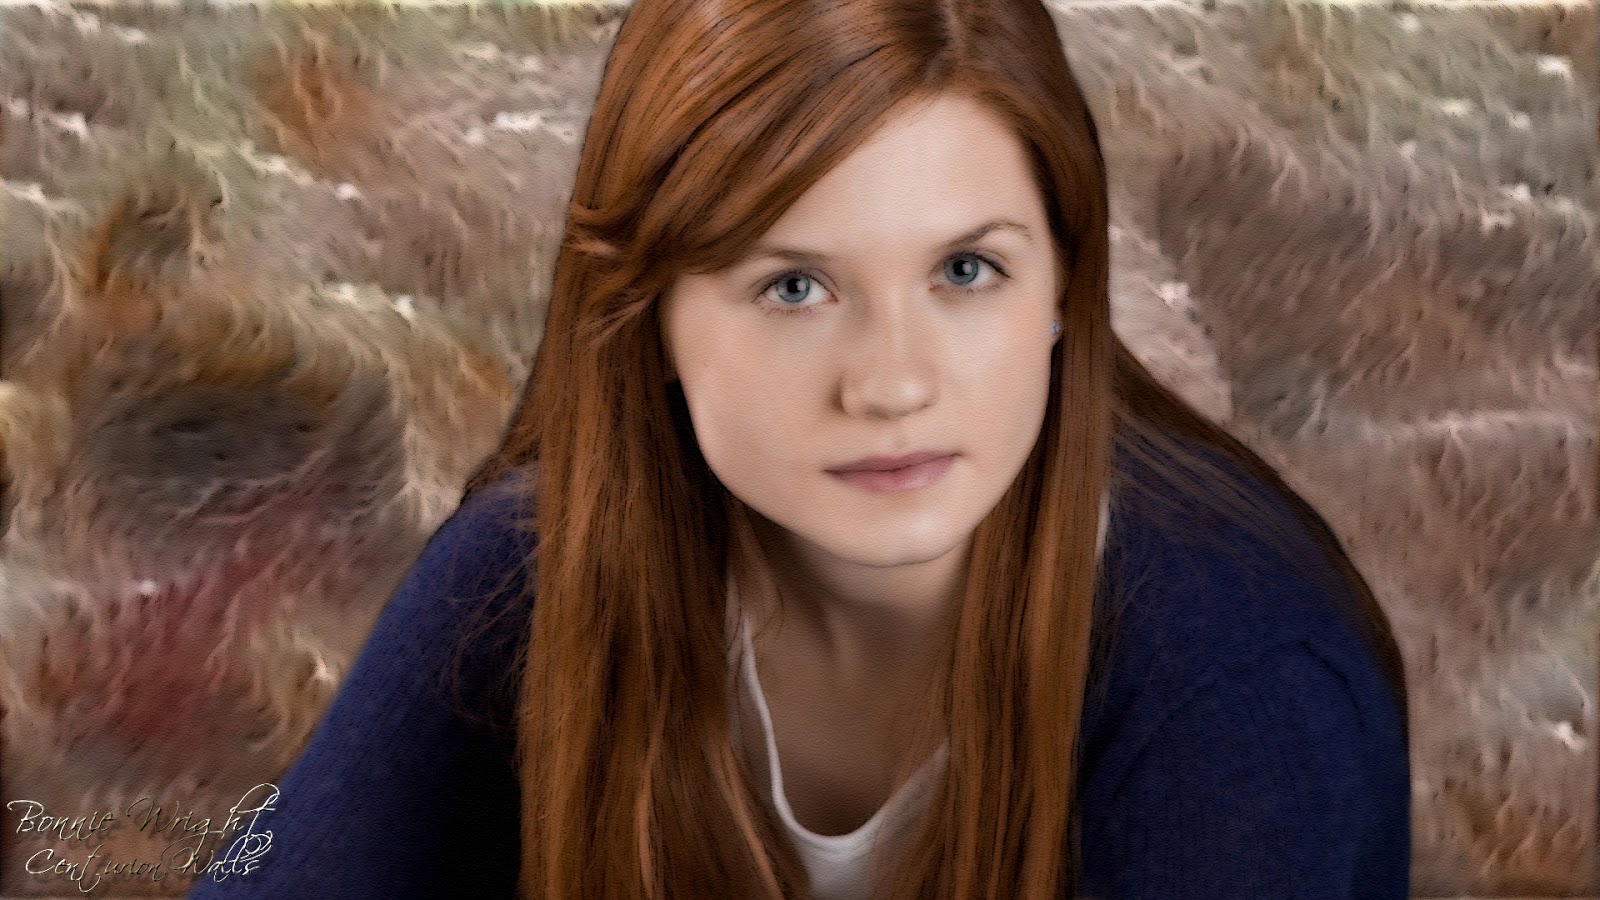 Hot Bio Celebrity Pictures: Bonnie Wright Wallpapers